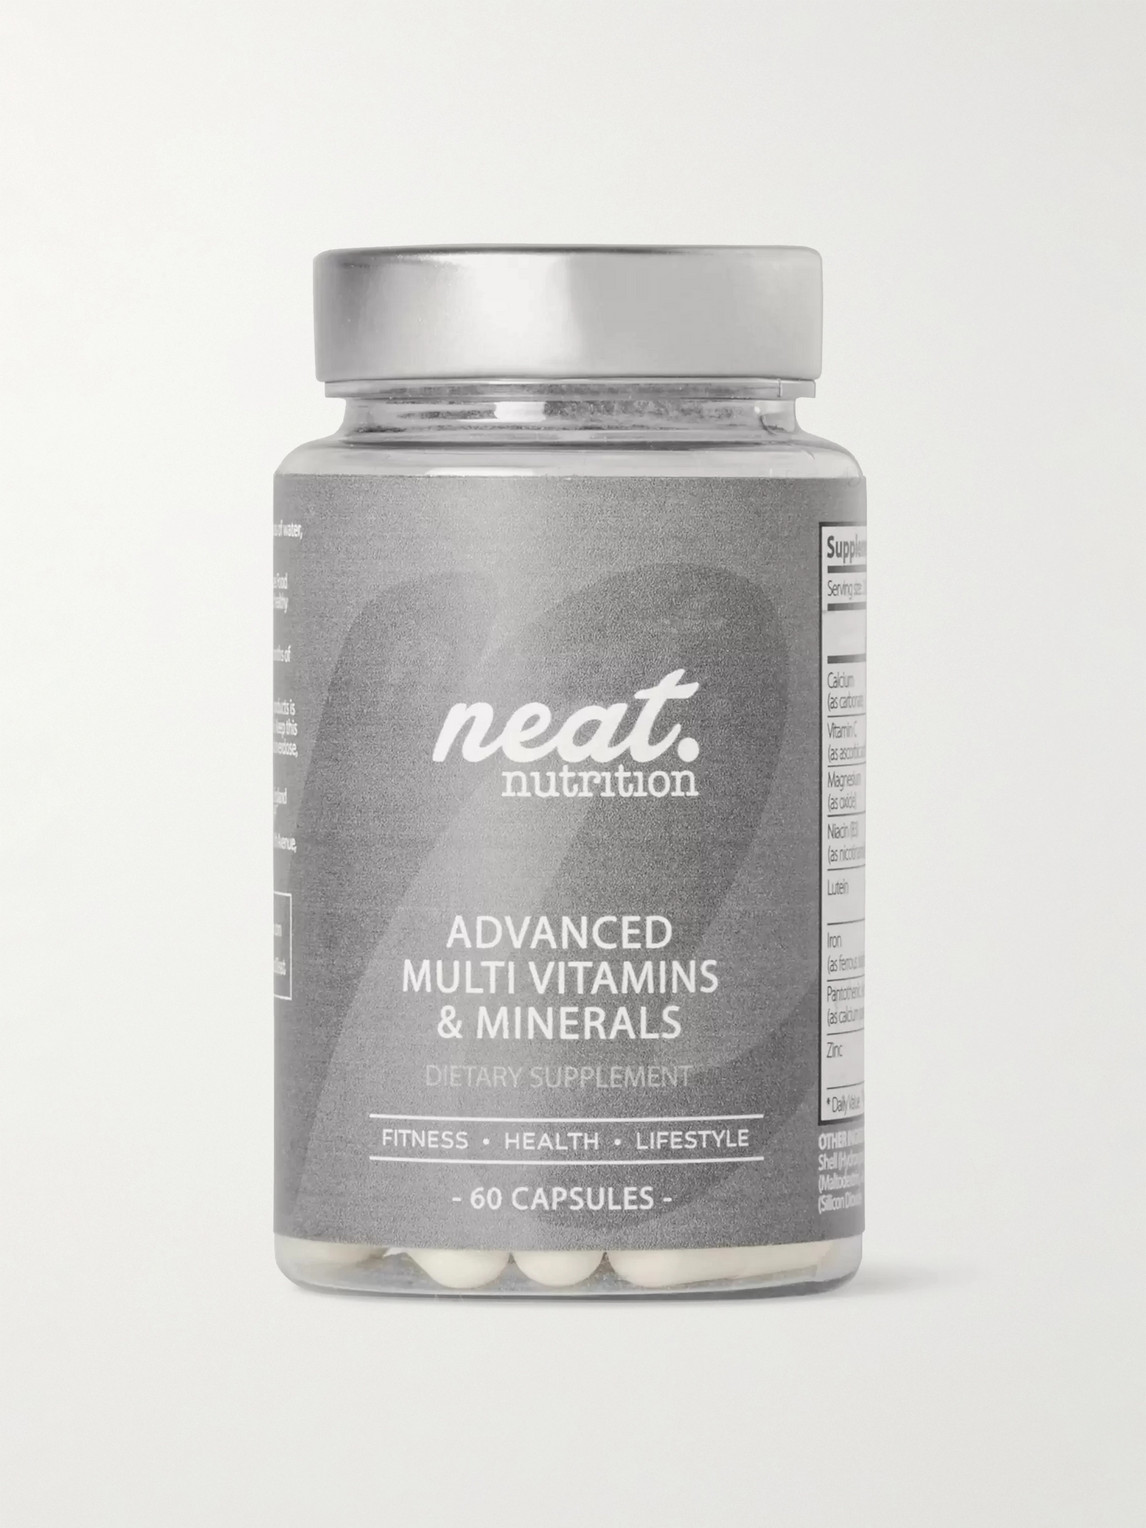 Neat Nutrition Advanced Multi Vitamins & Minerals, 60 Capsules In Colorless